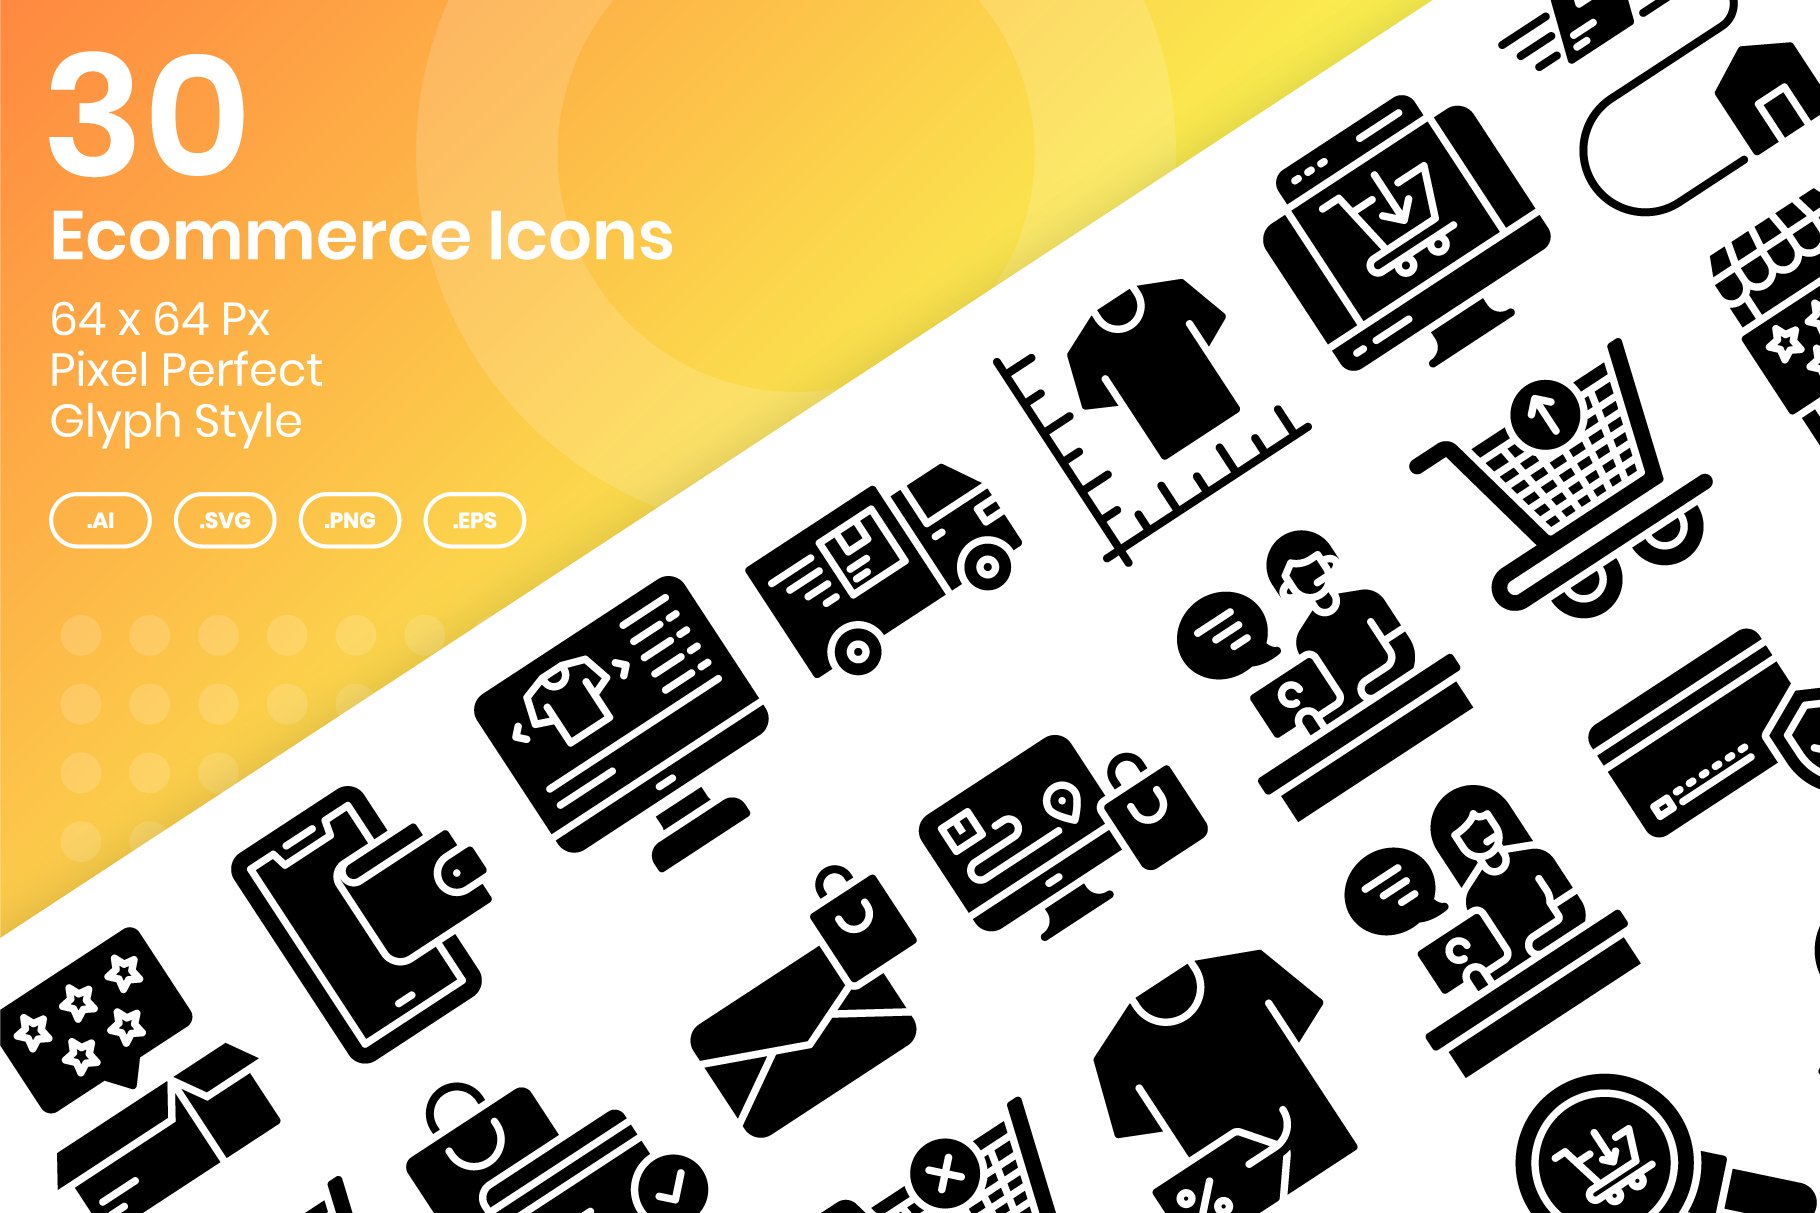 30 Ecommerce Icons Set - Glyph cover image.